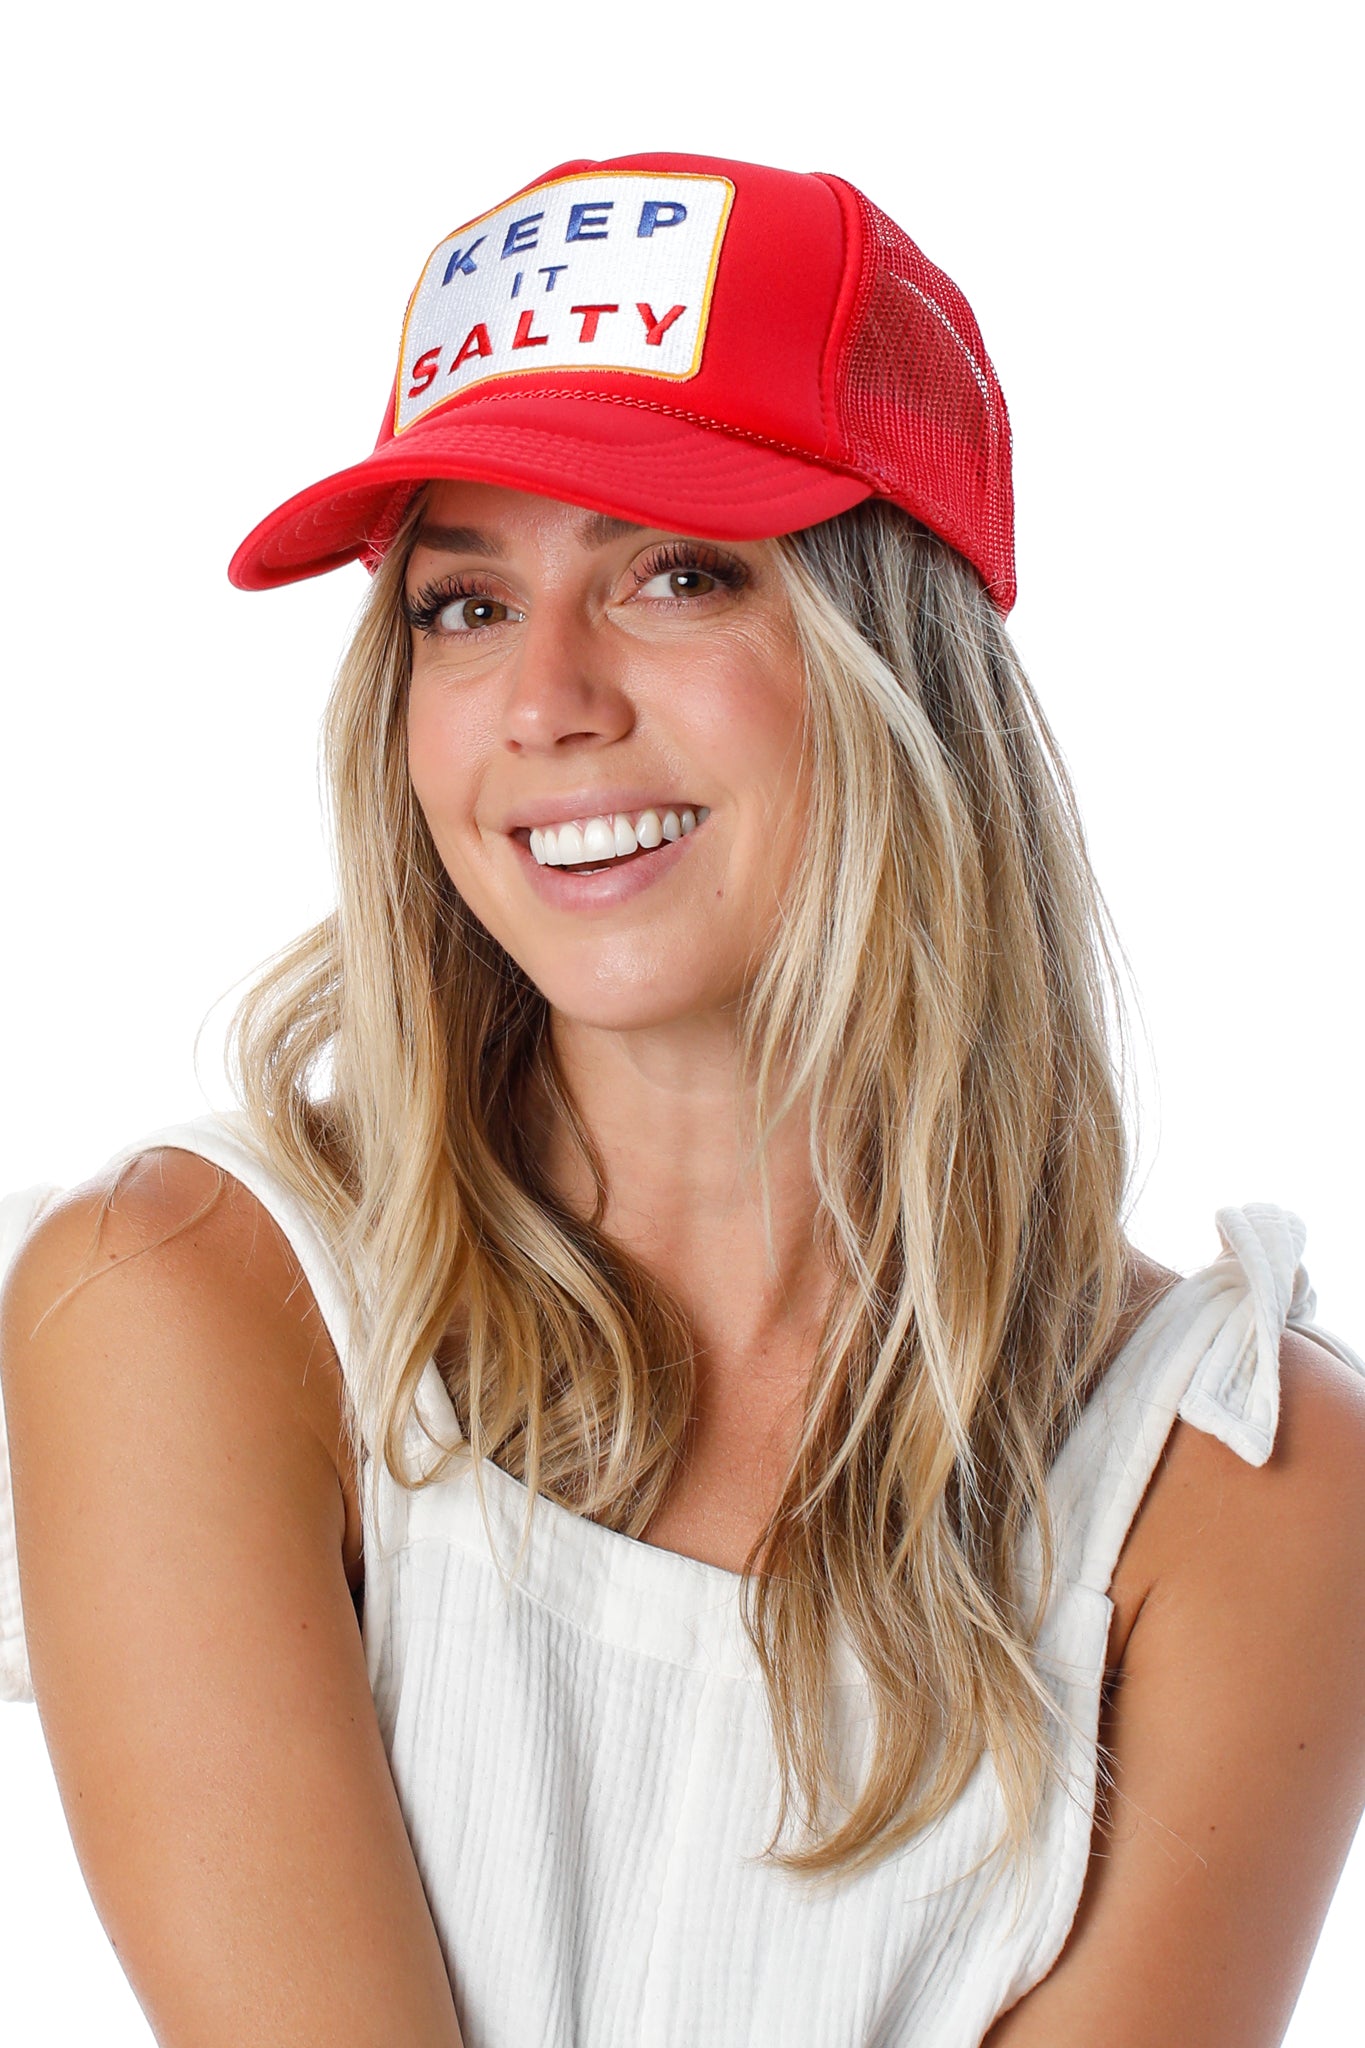 Keep It Salty Hat- Red